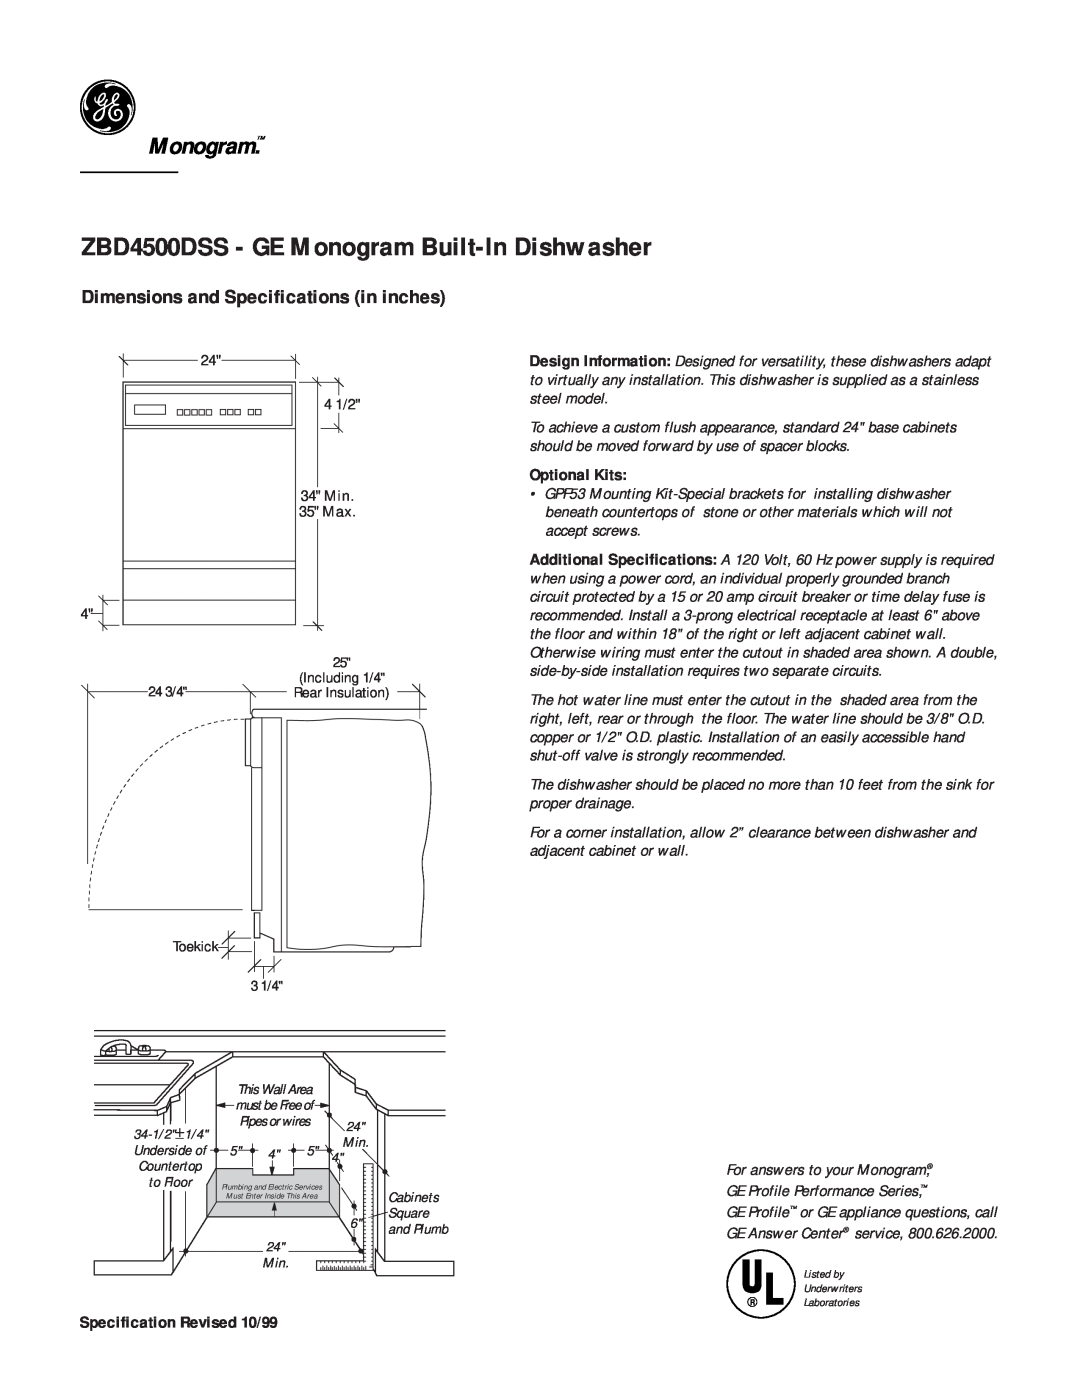 GE dimensions ZBD4500DSS - GE Monogram Built-InDishwasher, Dimensions and Specifications in inches, Optional Kits 